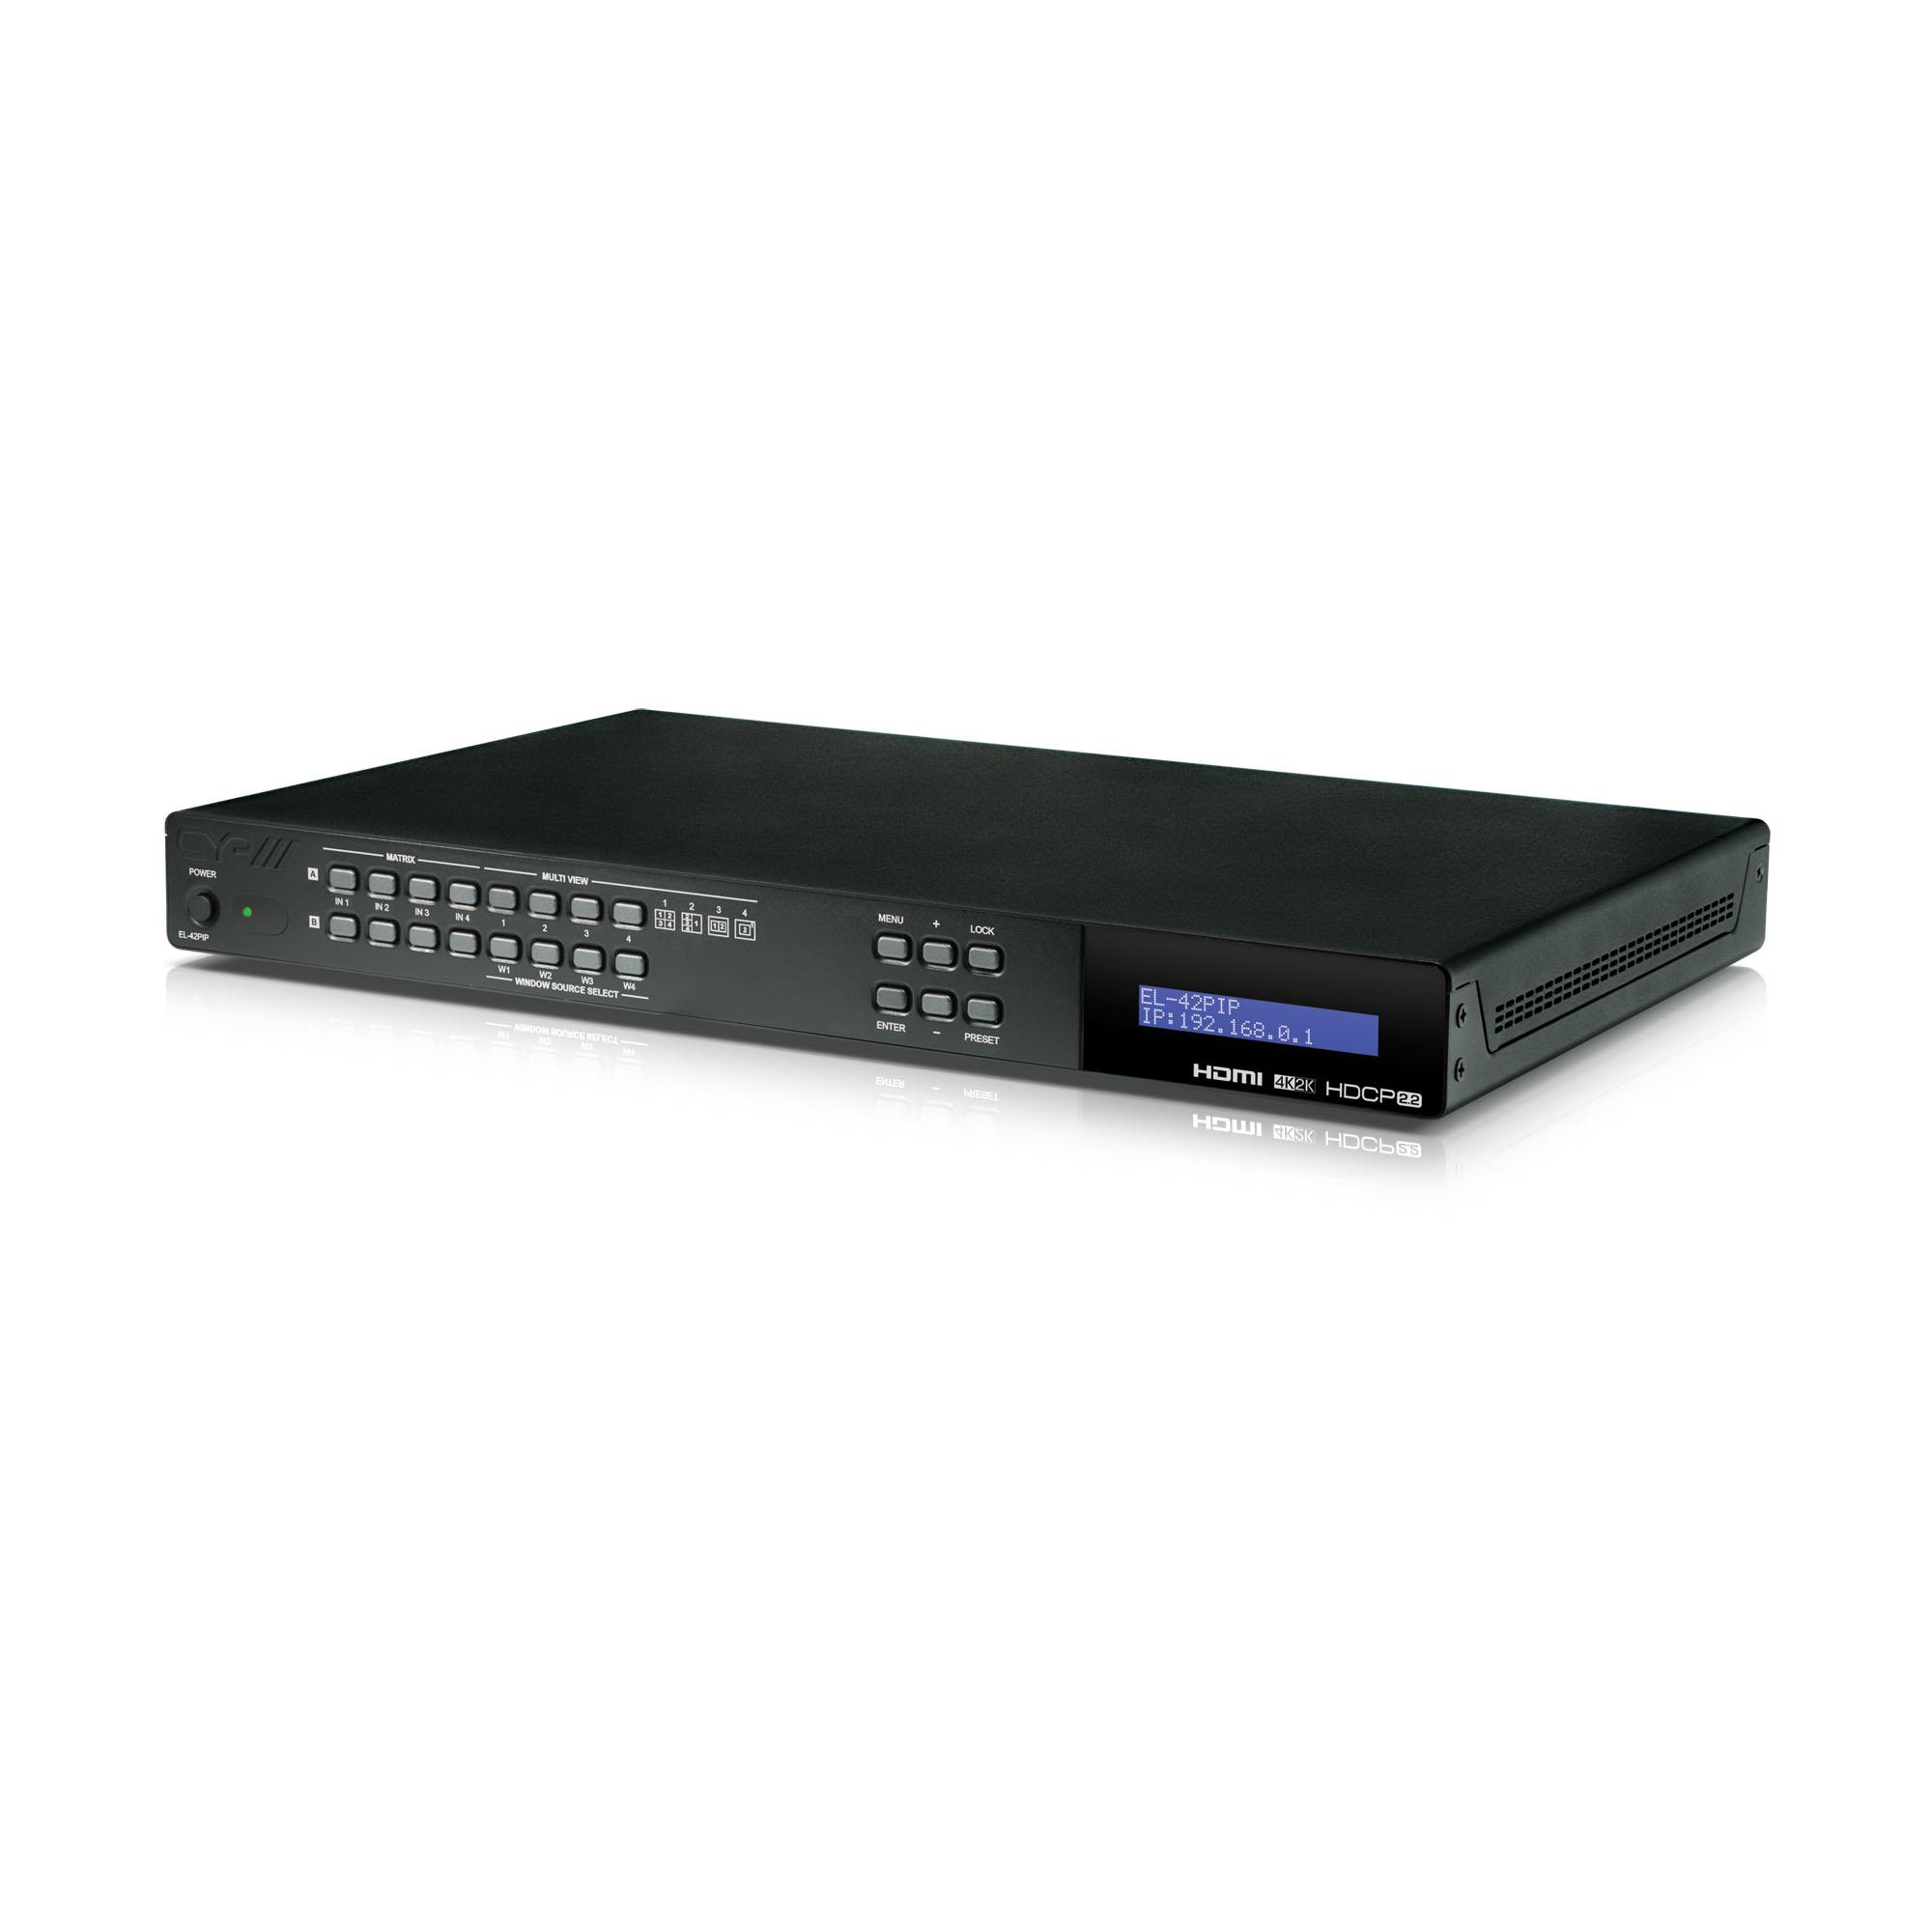 EL-42PIP 4x2 HDMI Multi-window scaling switcher (Picture in Picture)